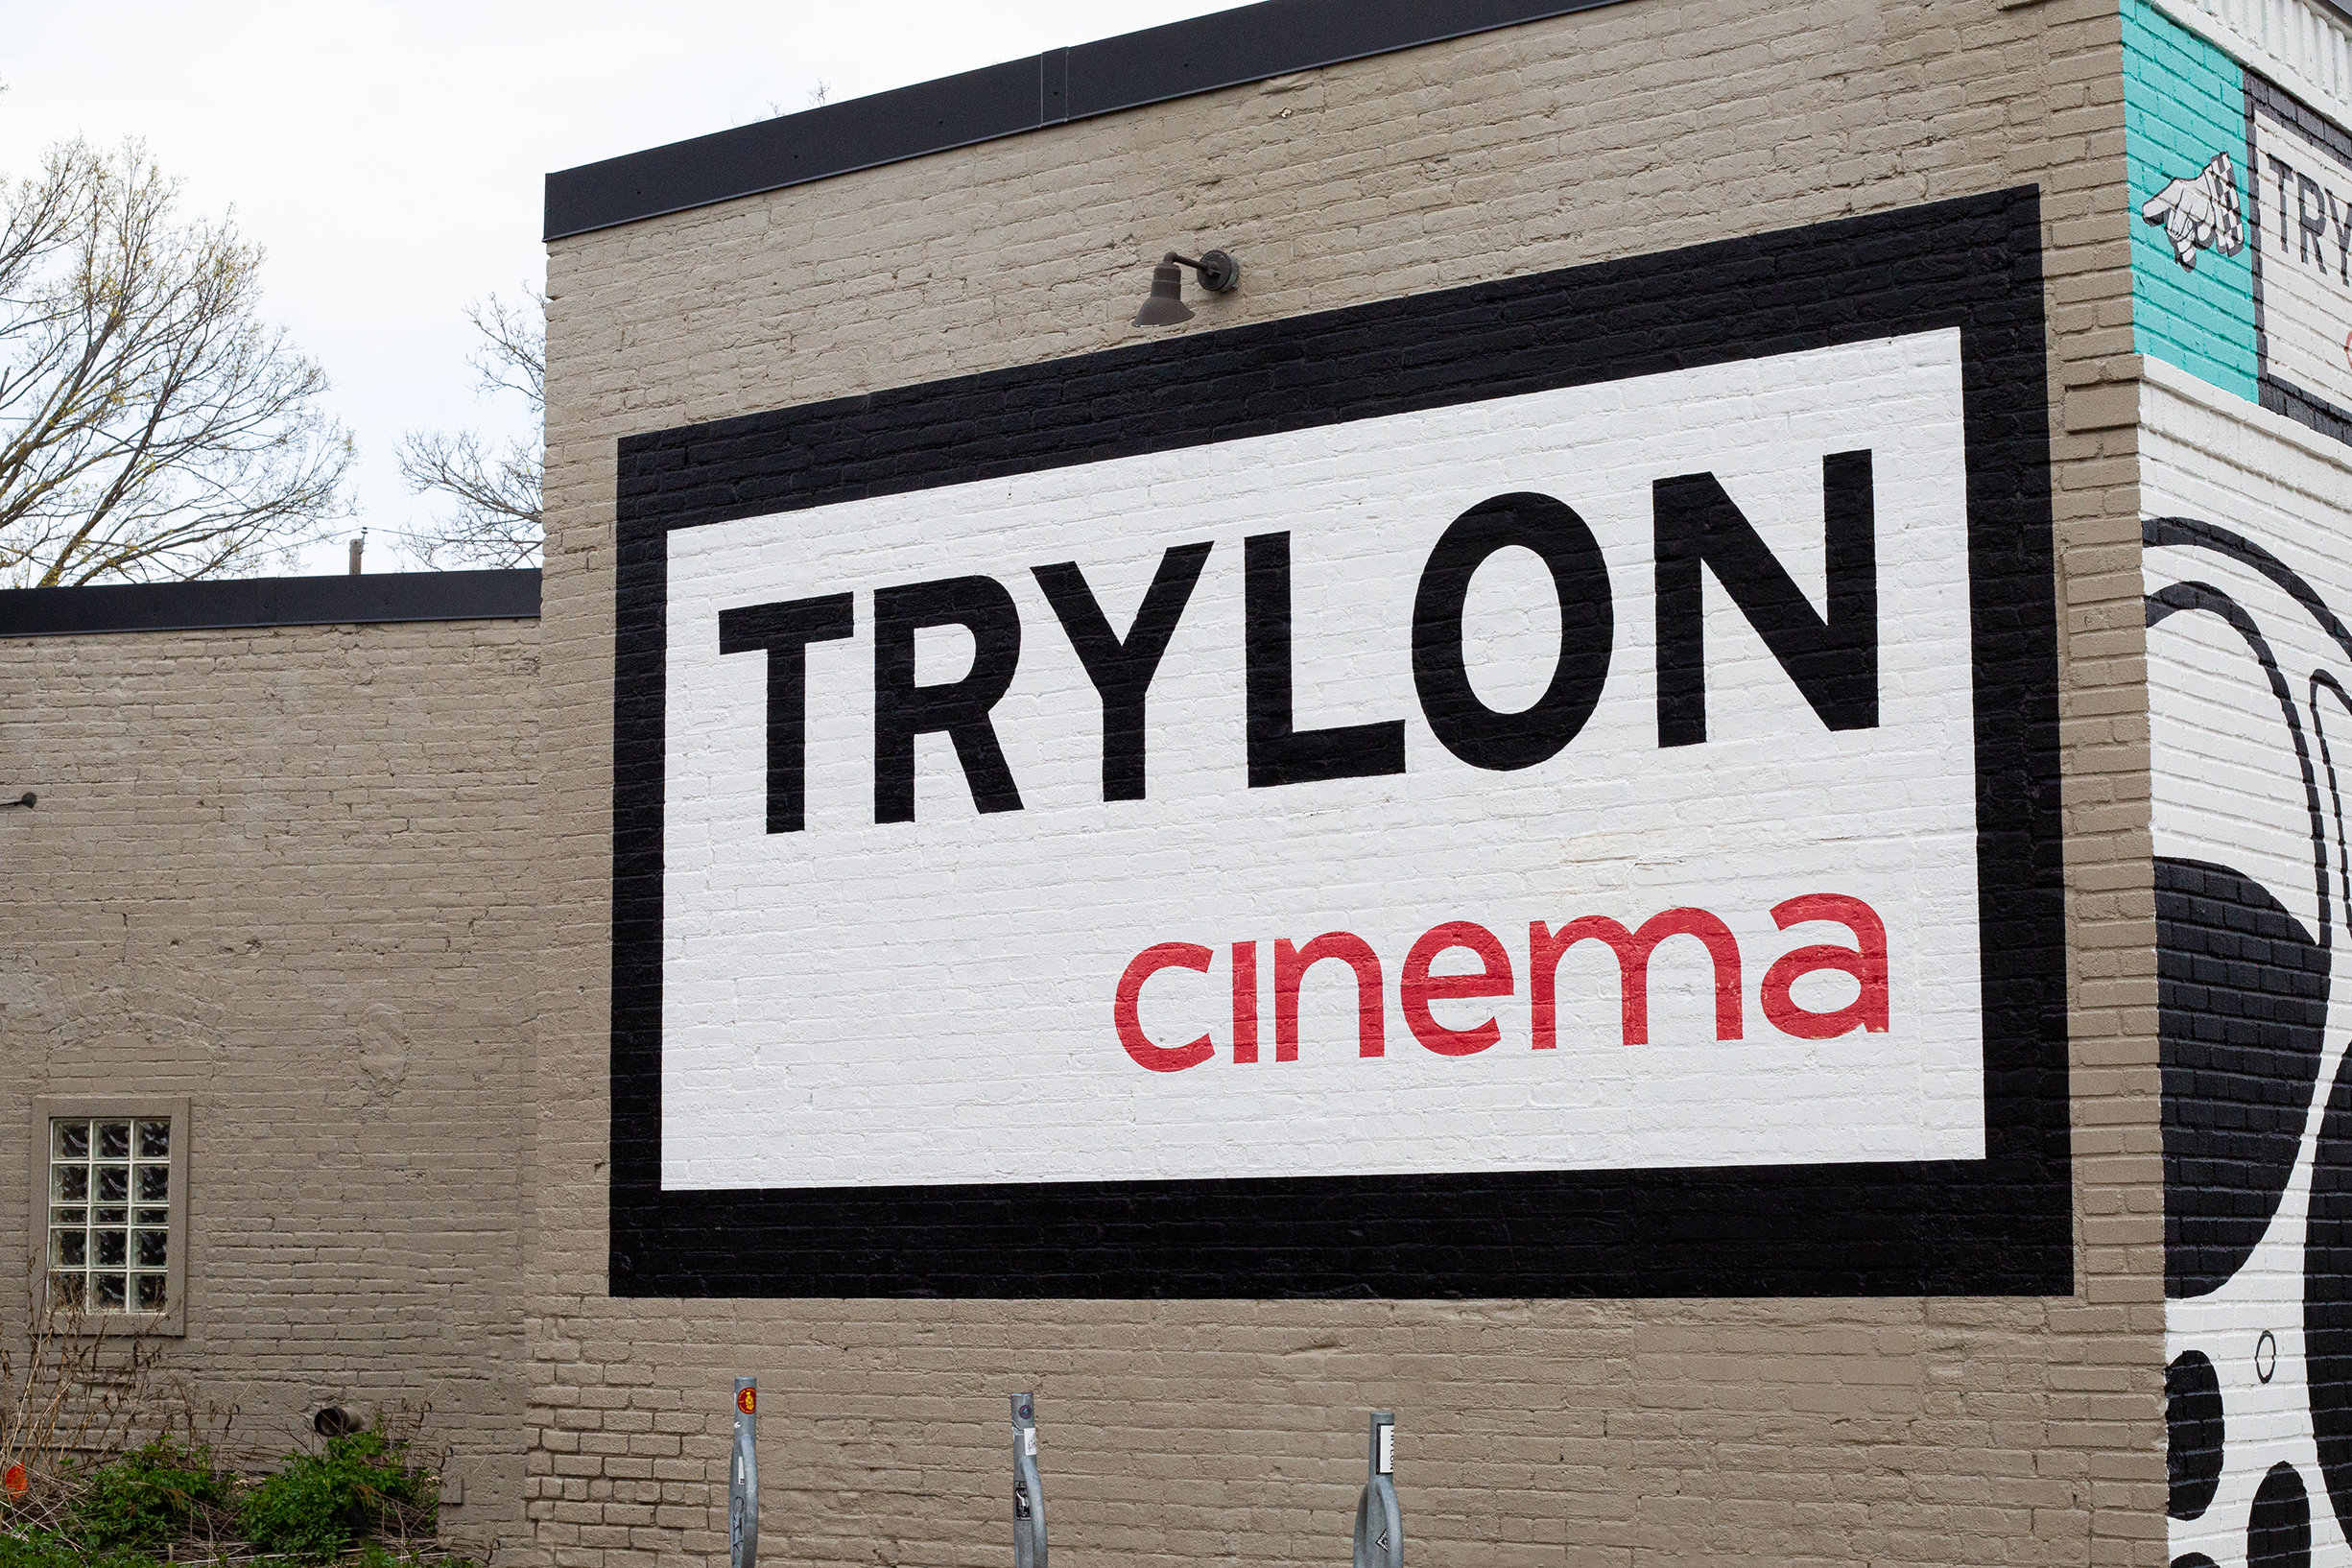 A mural reading, "Trylon Cinema" painted on the outside of a building.